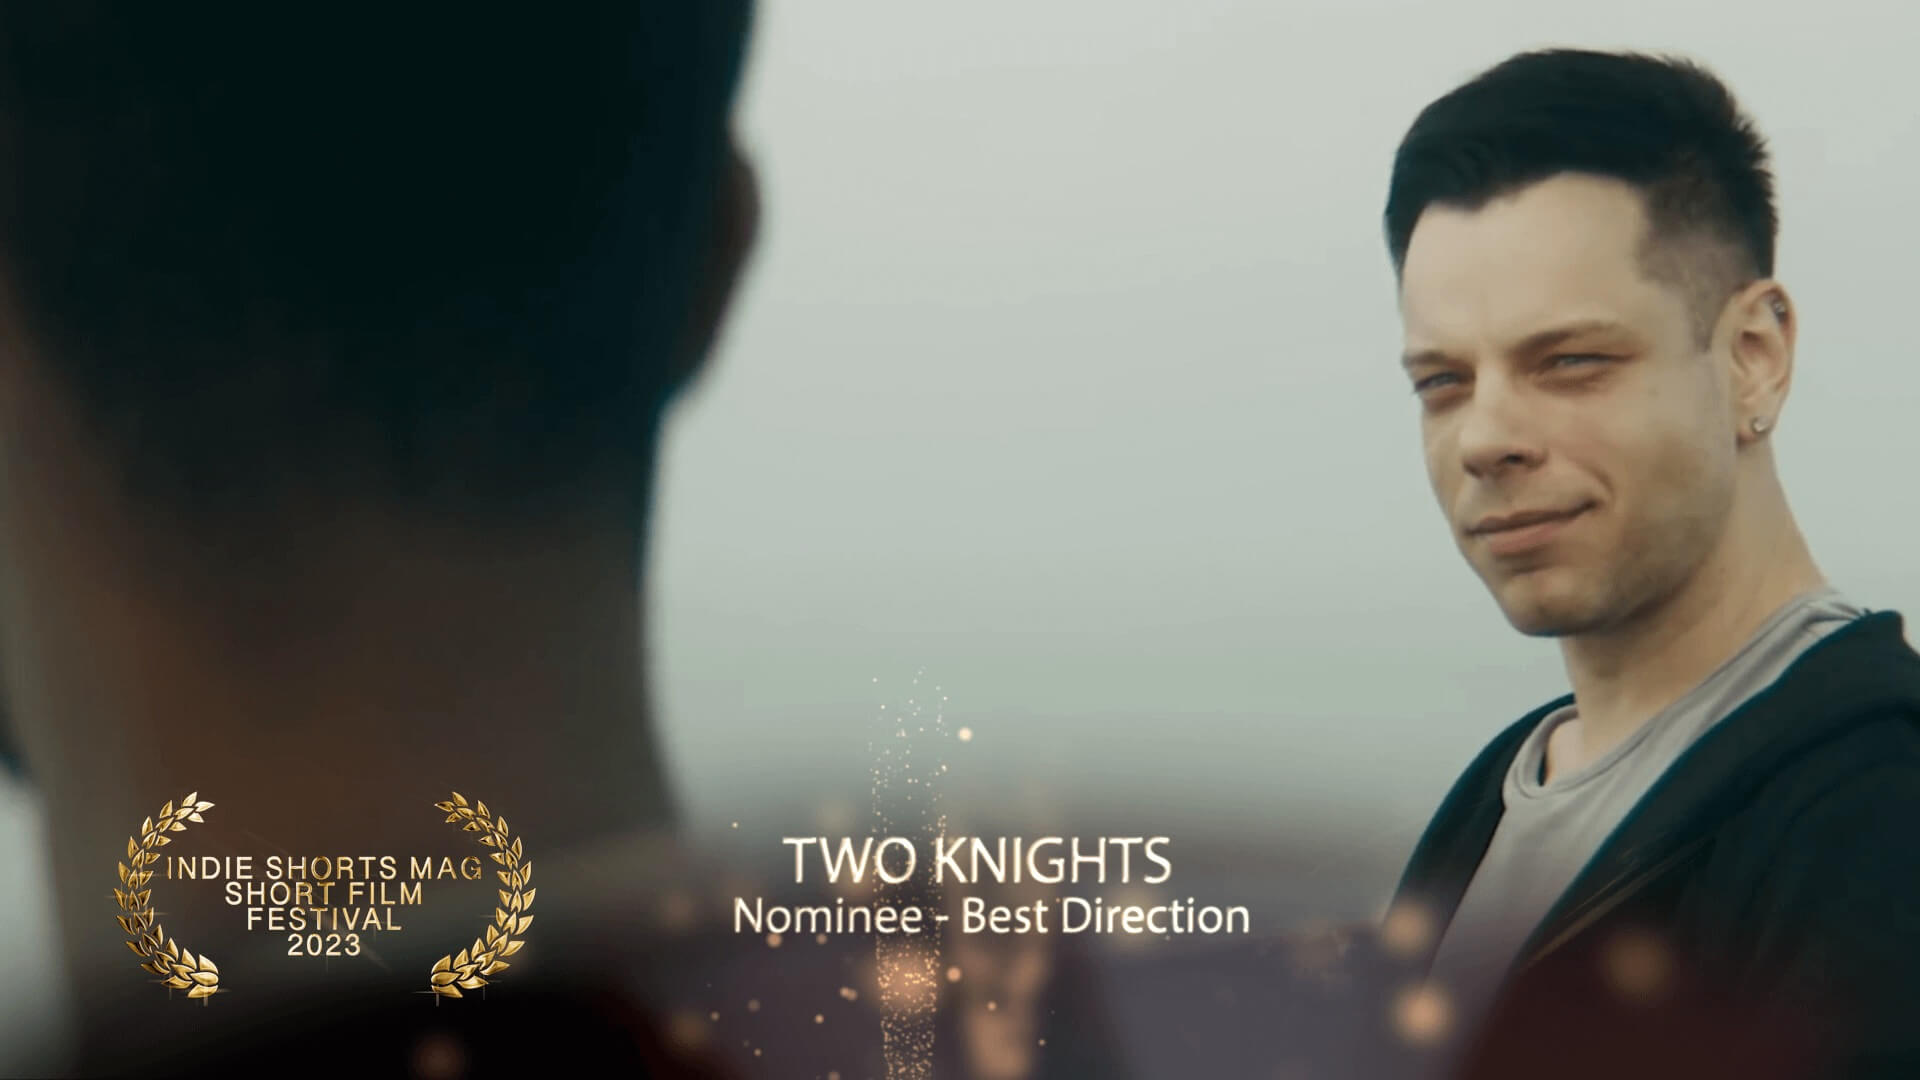 Indie Shorts Mag Short Film Festival - Best Direction - Nominee - Two Knights